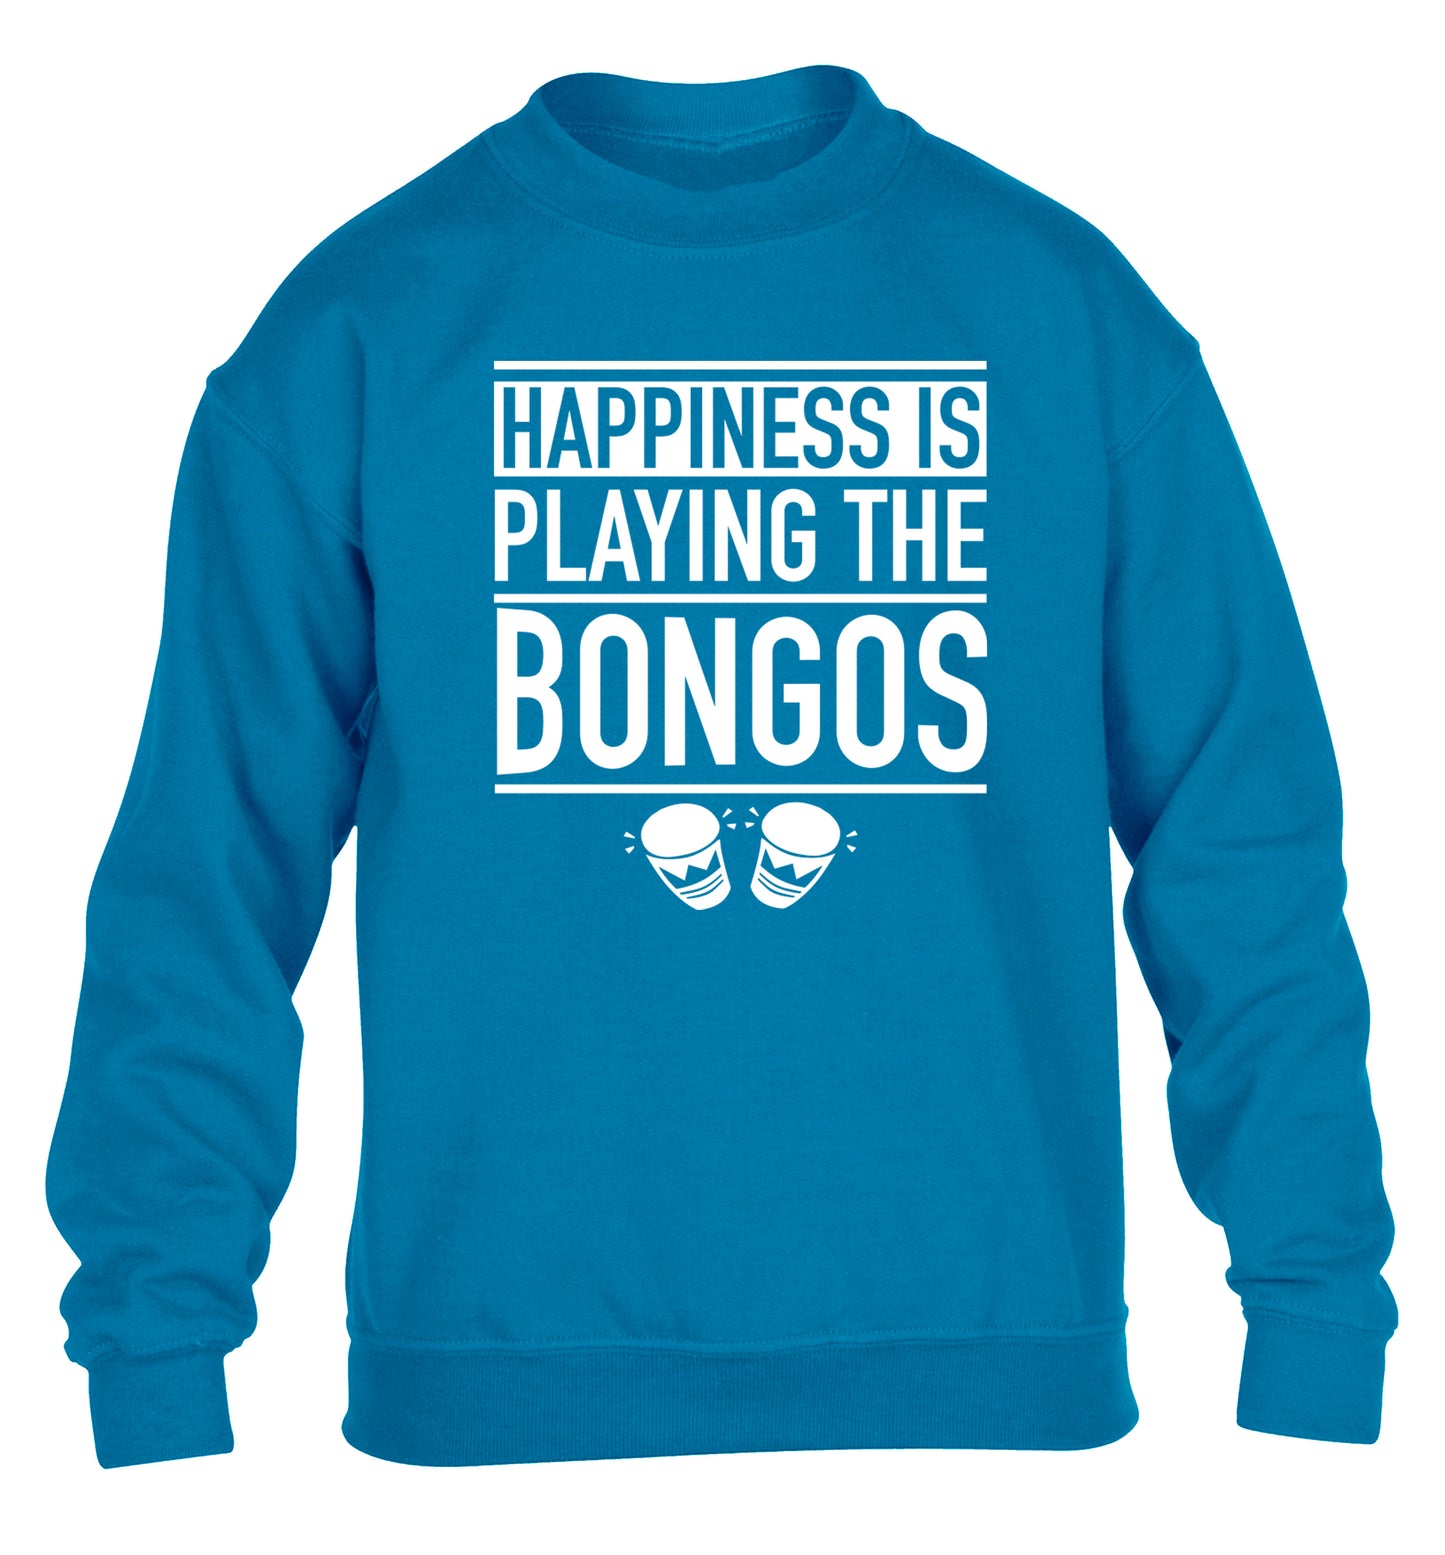 Happiness is playing the bongos children's blue sweater 12-14 Years